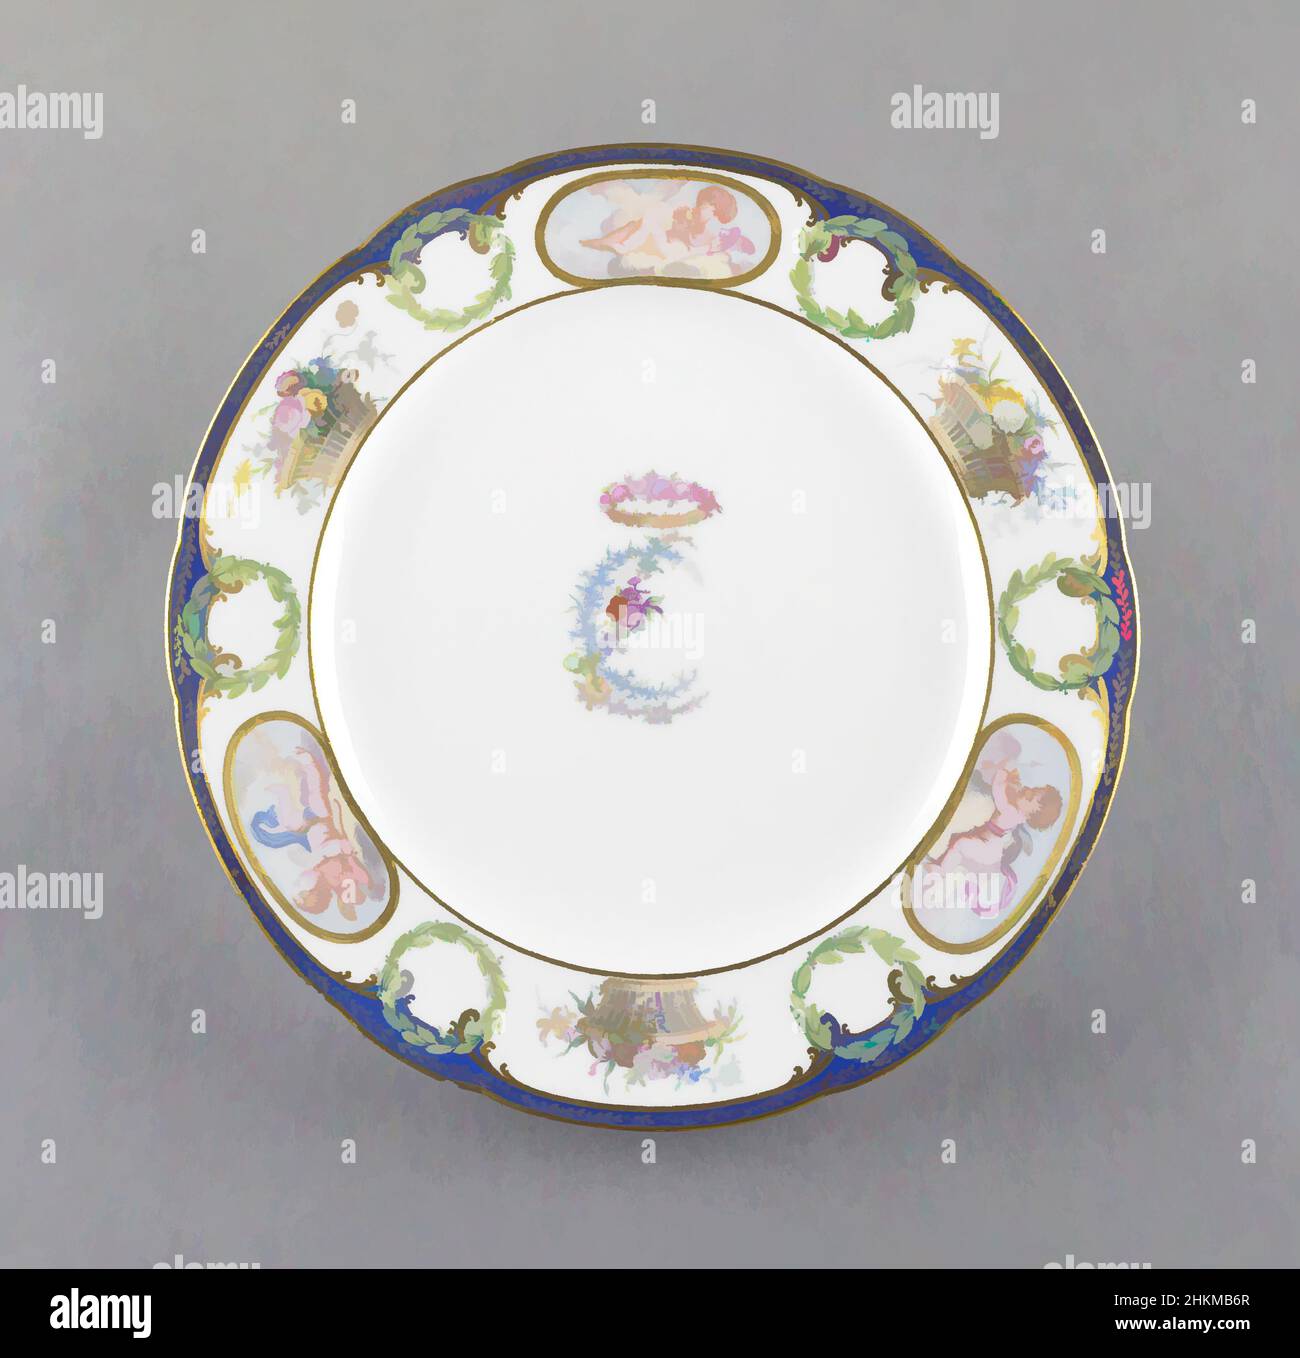 Art inspired by Plate, from the Charlotte-Louise Service, commissioned by Louis XV, King of France (1715-1774), French, 1710 - 1774, Sèvres Porcelain Factory, France, founded 1756, Jean-Louis Morin, French, 1732-1787, Nicolas Bulidon, French, active 1763-1792, 1773, Glazed porcelain, Classic works modernized by Artotop with a splash of modernity. Shapes, color and value, eye-catching visual impact on art. Emotions through freedom of artworks in a contemporary way. A timeless message pursuing a wildly creative new direction. Artists turning to the digital medium and creating the Artotop NFT Stock Photo